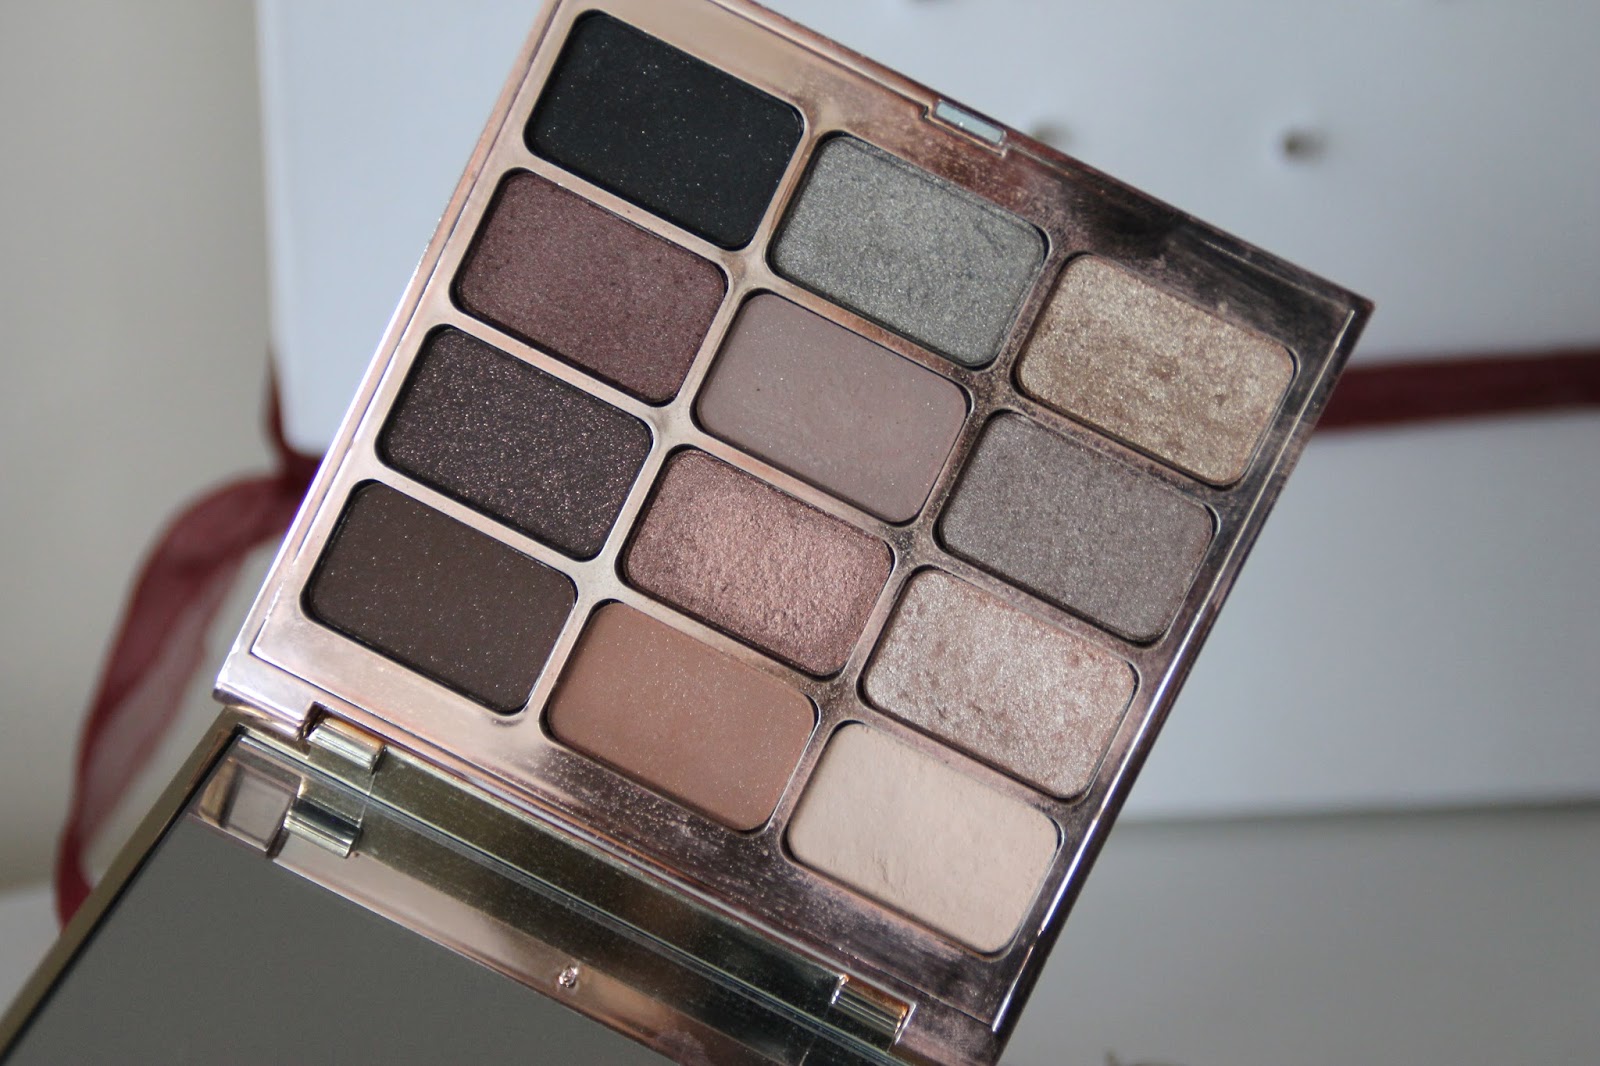 STILA Eyes Are The Window Shadow Palette Review & Swatches.